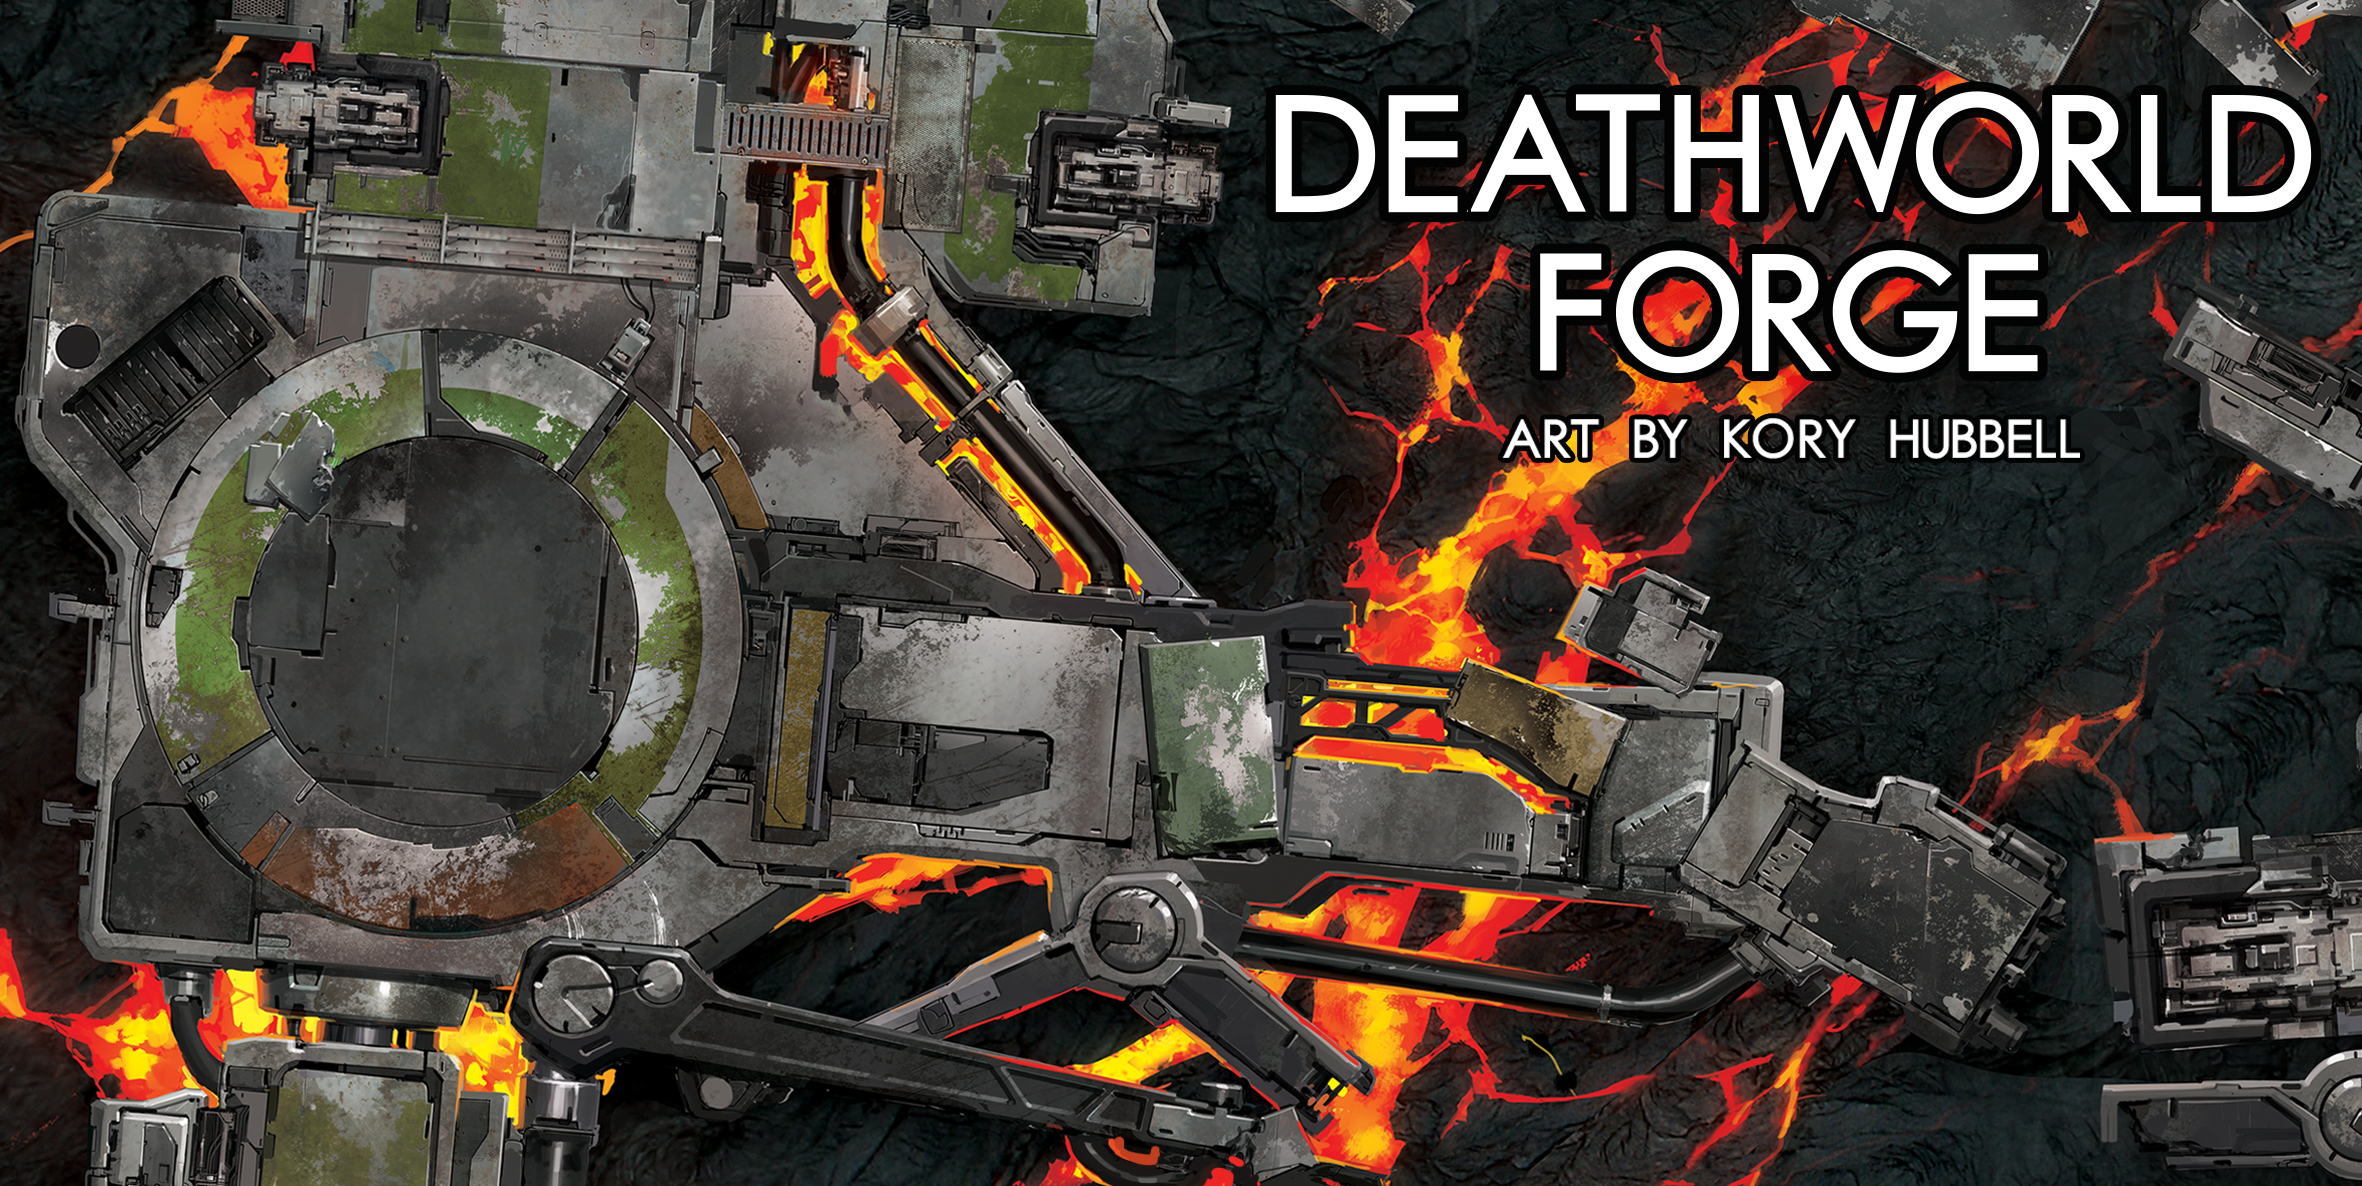 The Deathworld Forge – new mats in stock!